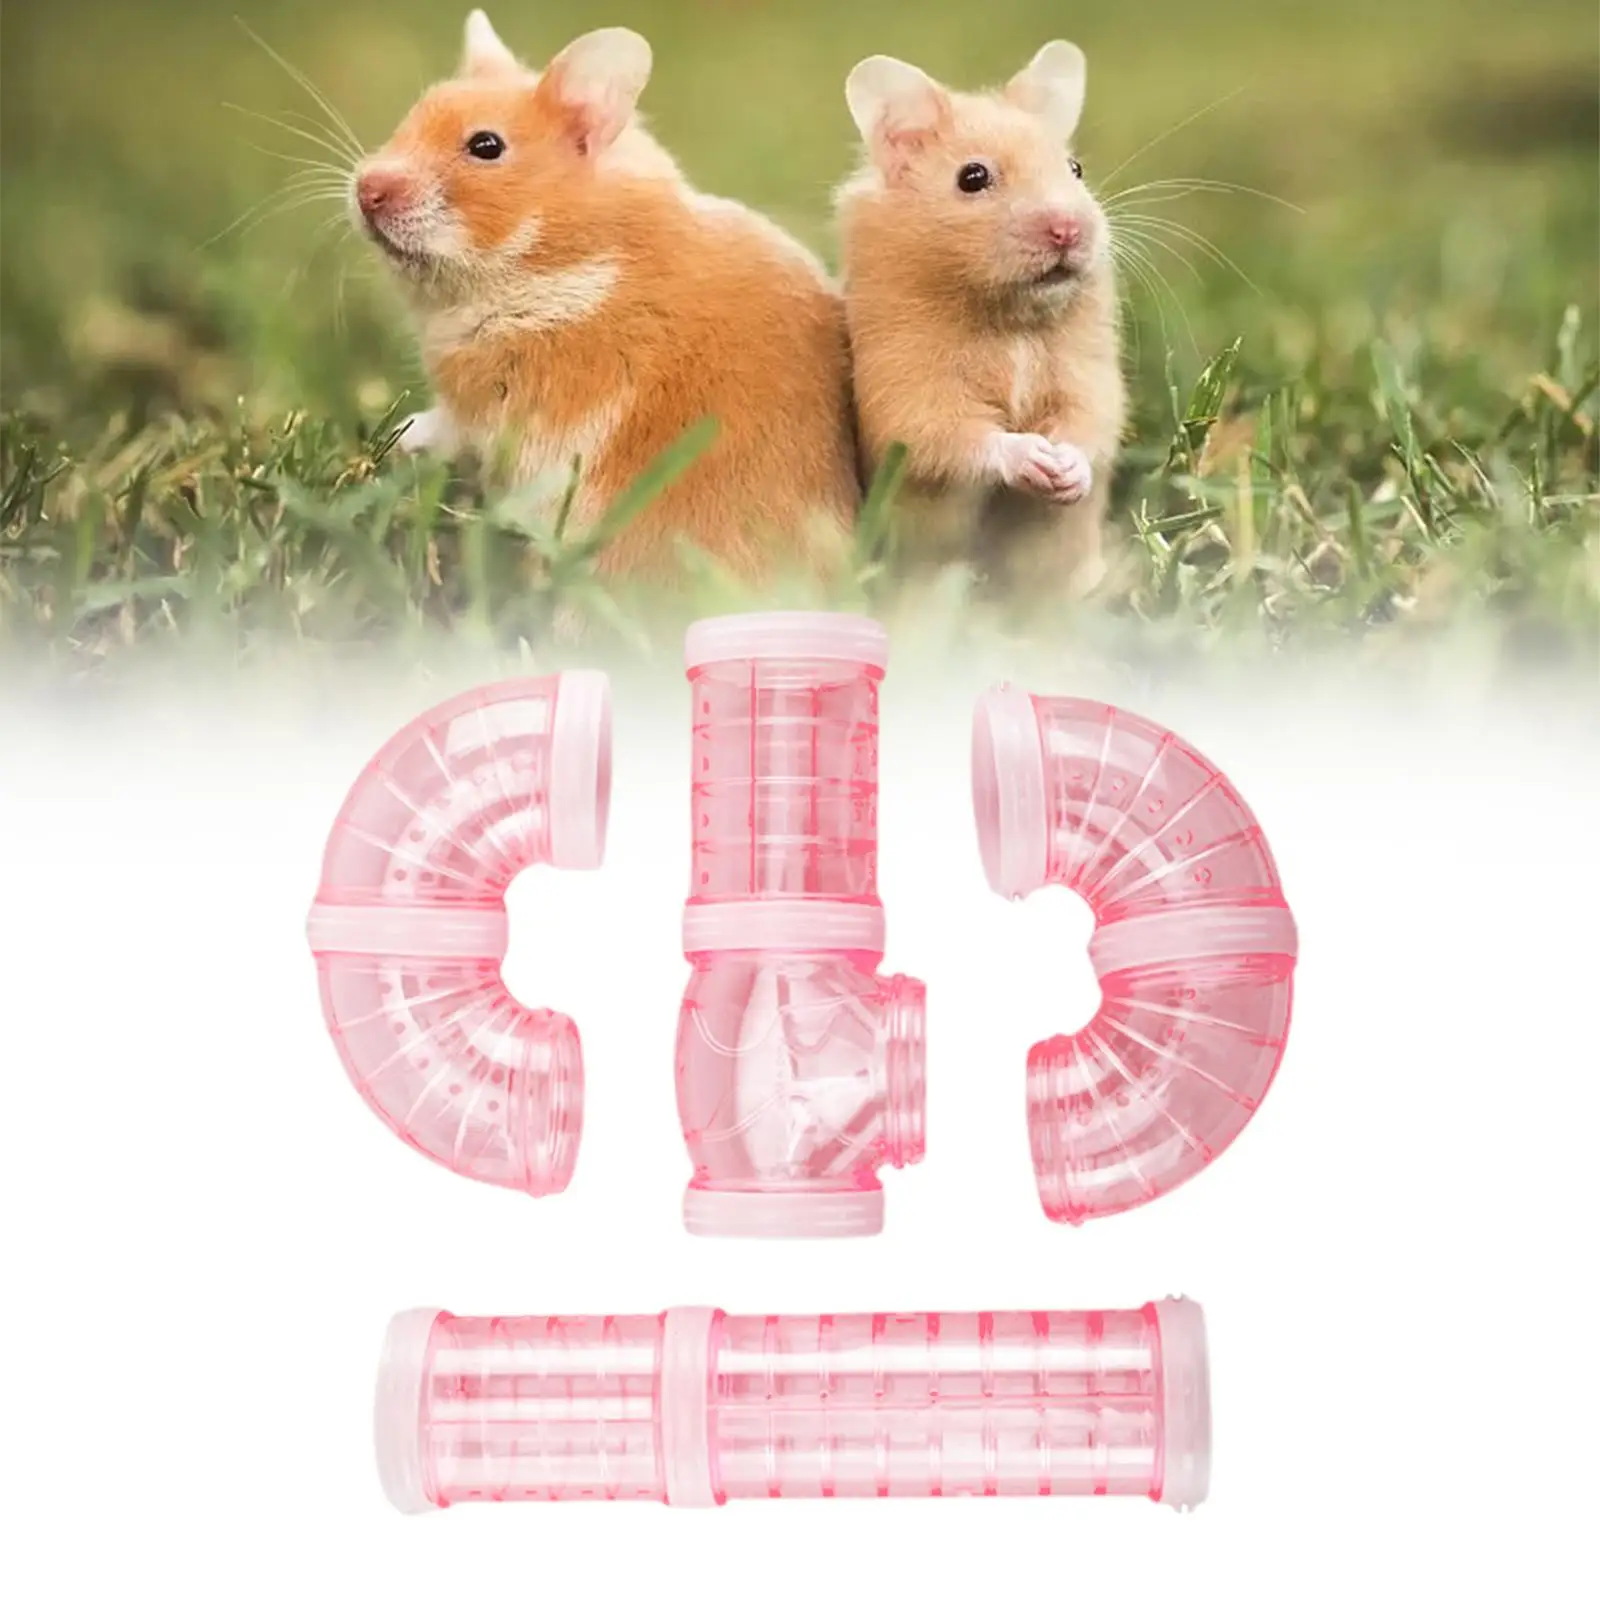 Hamster Tube Set 8Pcs Curved Pipe Pet Cage Tunnel Hamster Exercise Toys for Hamster Small Animals Small Pet Toy Cage Accessories